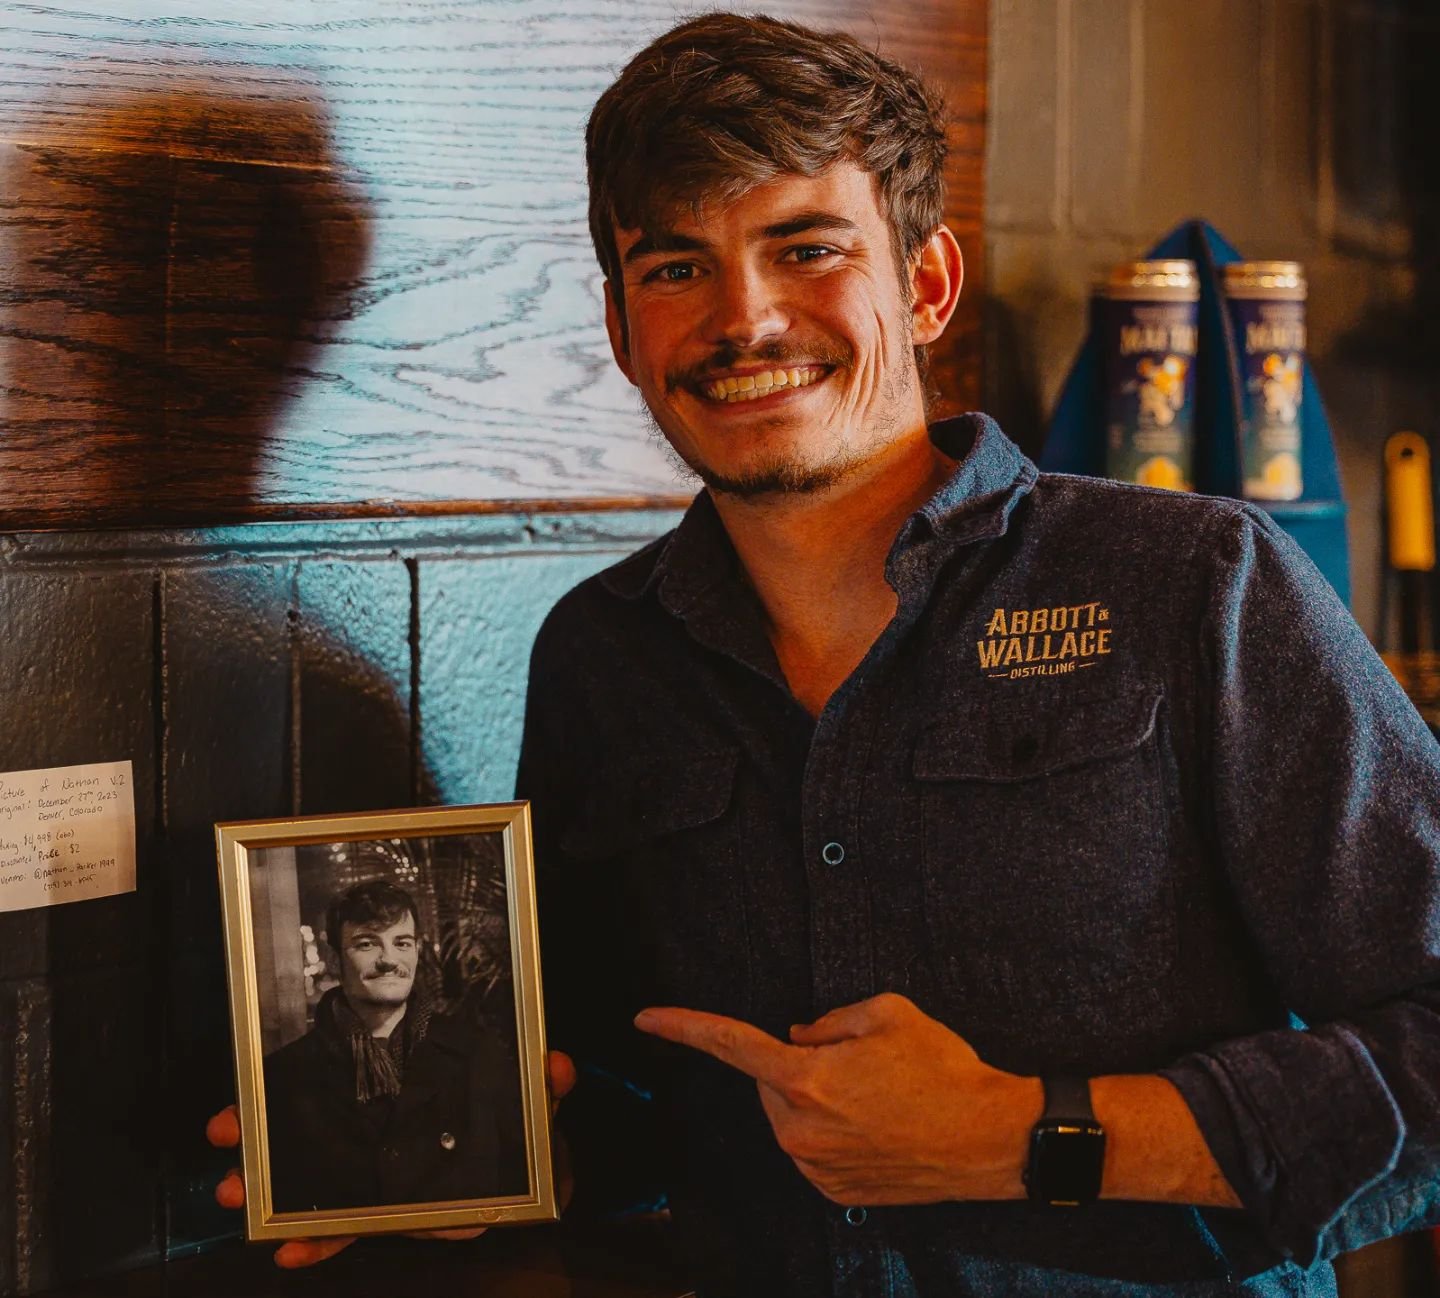 Nathan @bartendernathanryanparker is joining our Mexico Agave Spirits tasting on Wednesday to discuss tequila alternatives like Sotol and Bacanora. Join our World Tour Passport Program every 3rd Wednesday at 7pm!